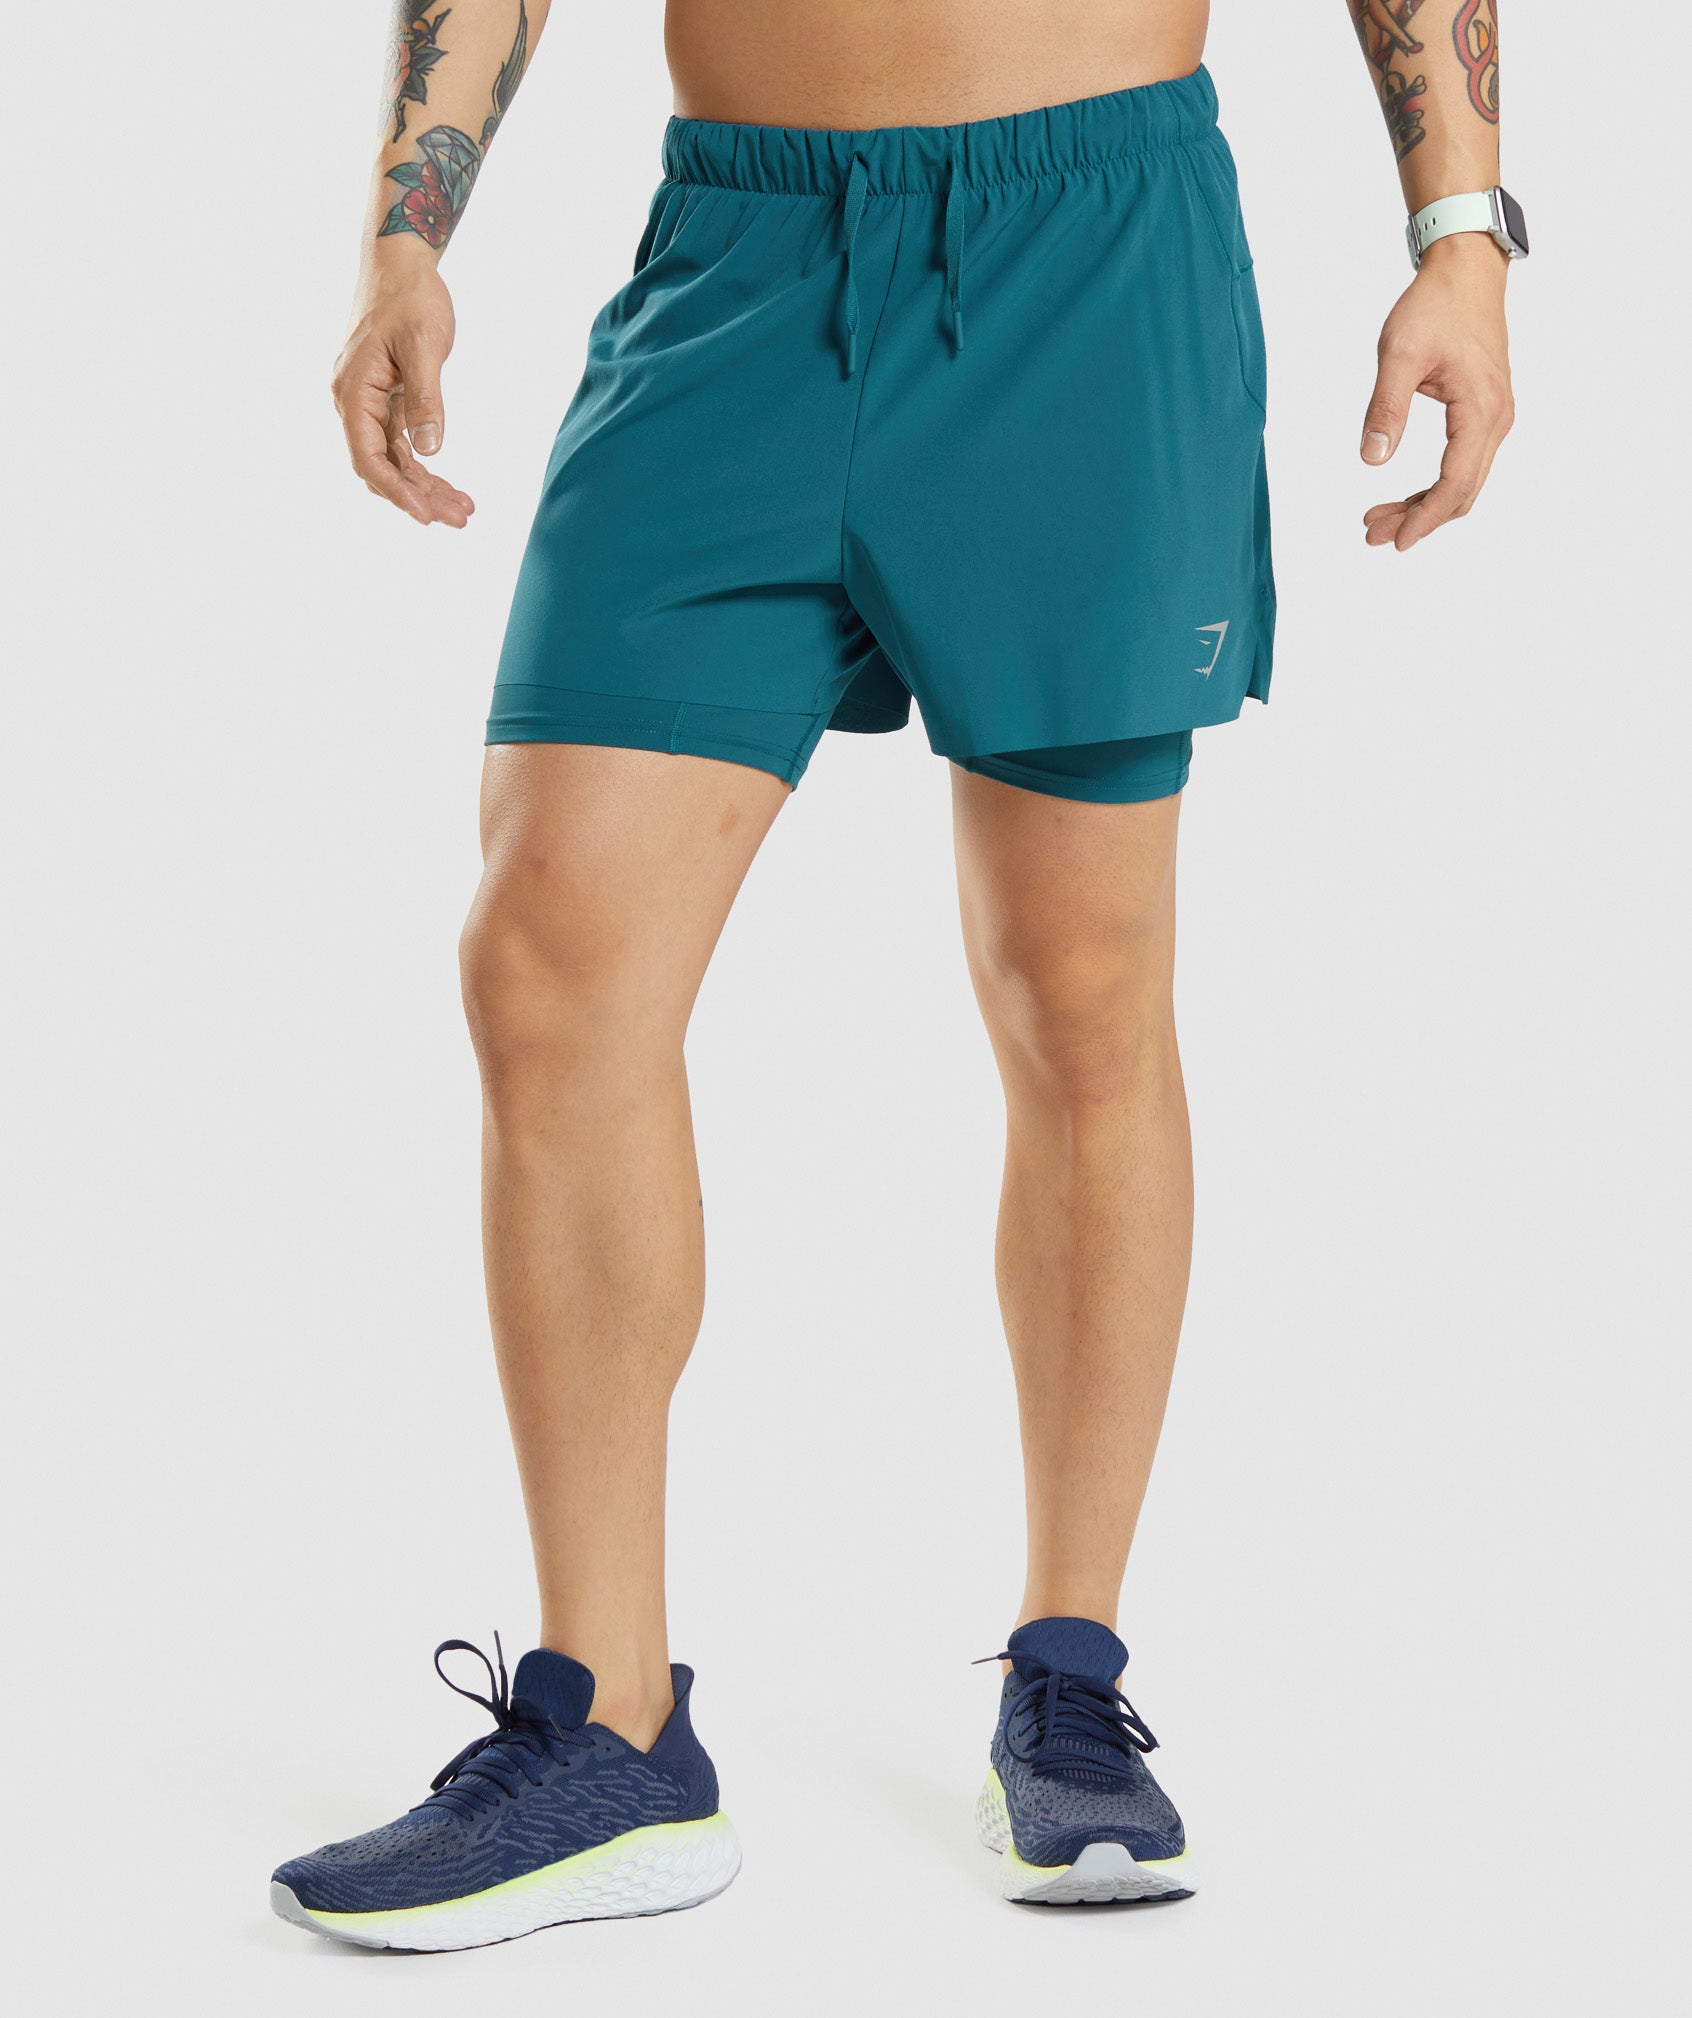 Speed 5" 2 in 1 Shorts in Teal - view 1